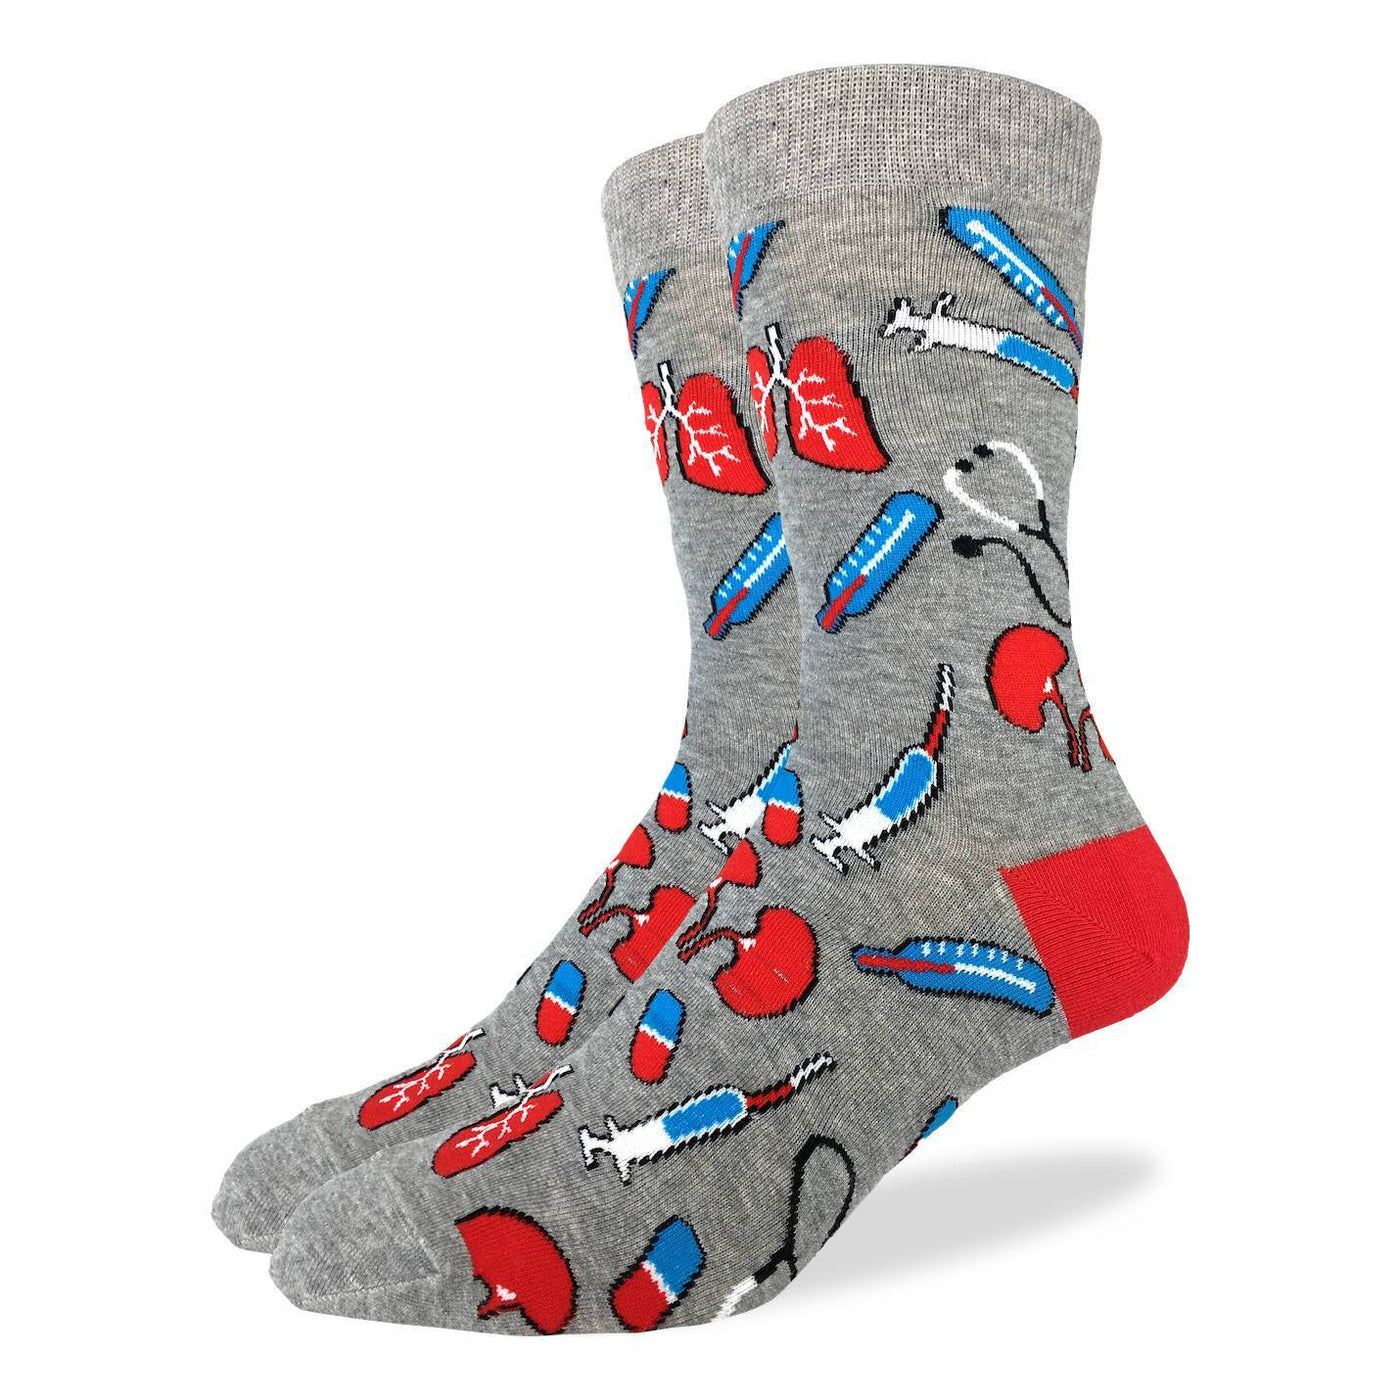 "Medical" Cotton Crew Socks by Good Luck Sock - SALE